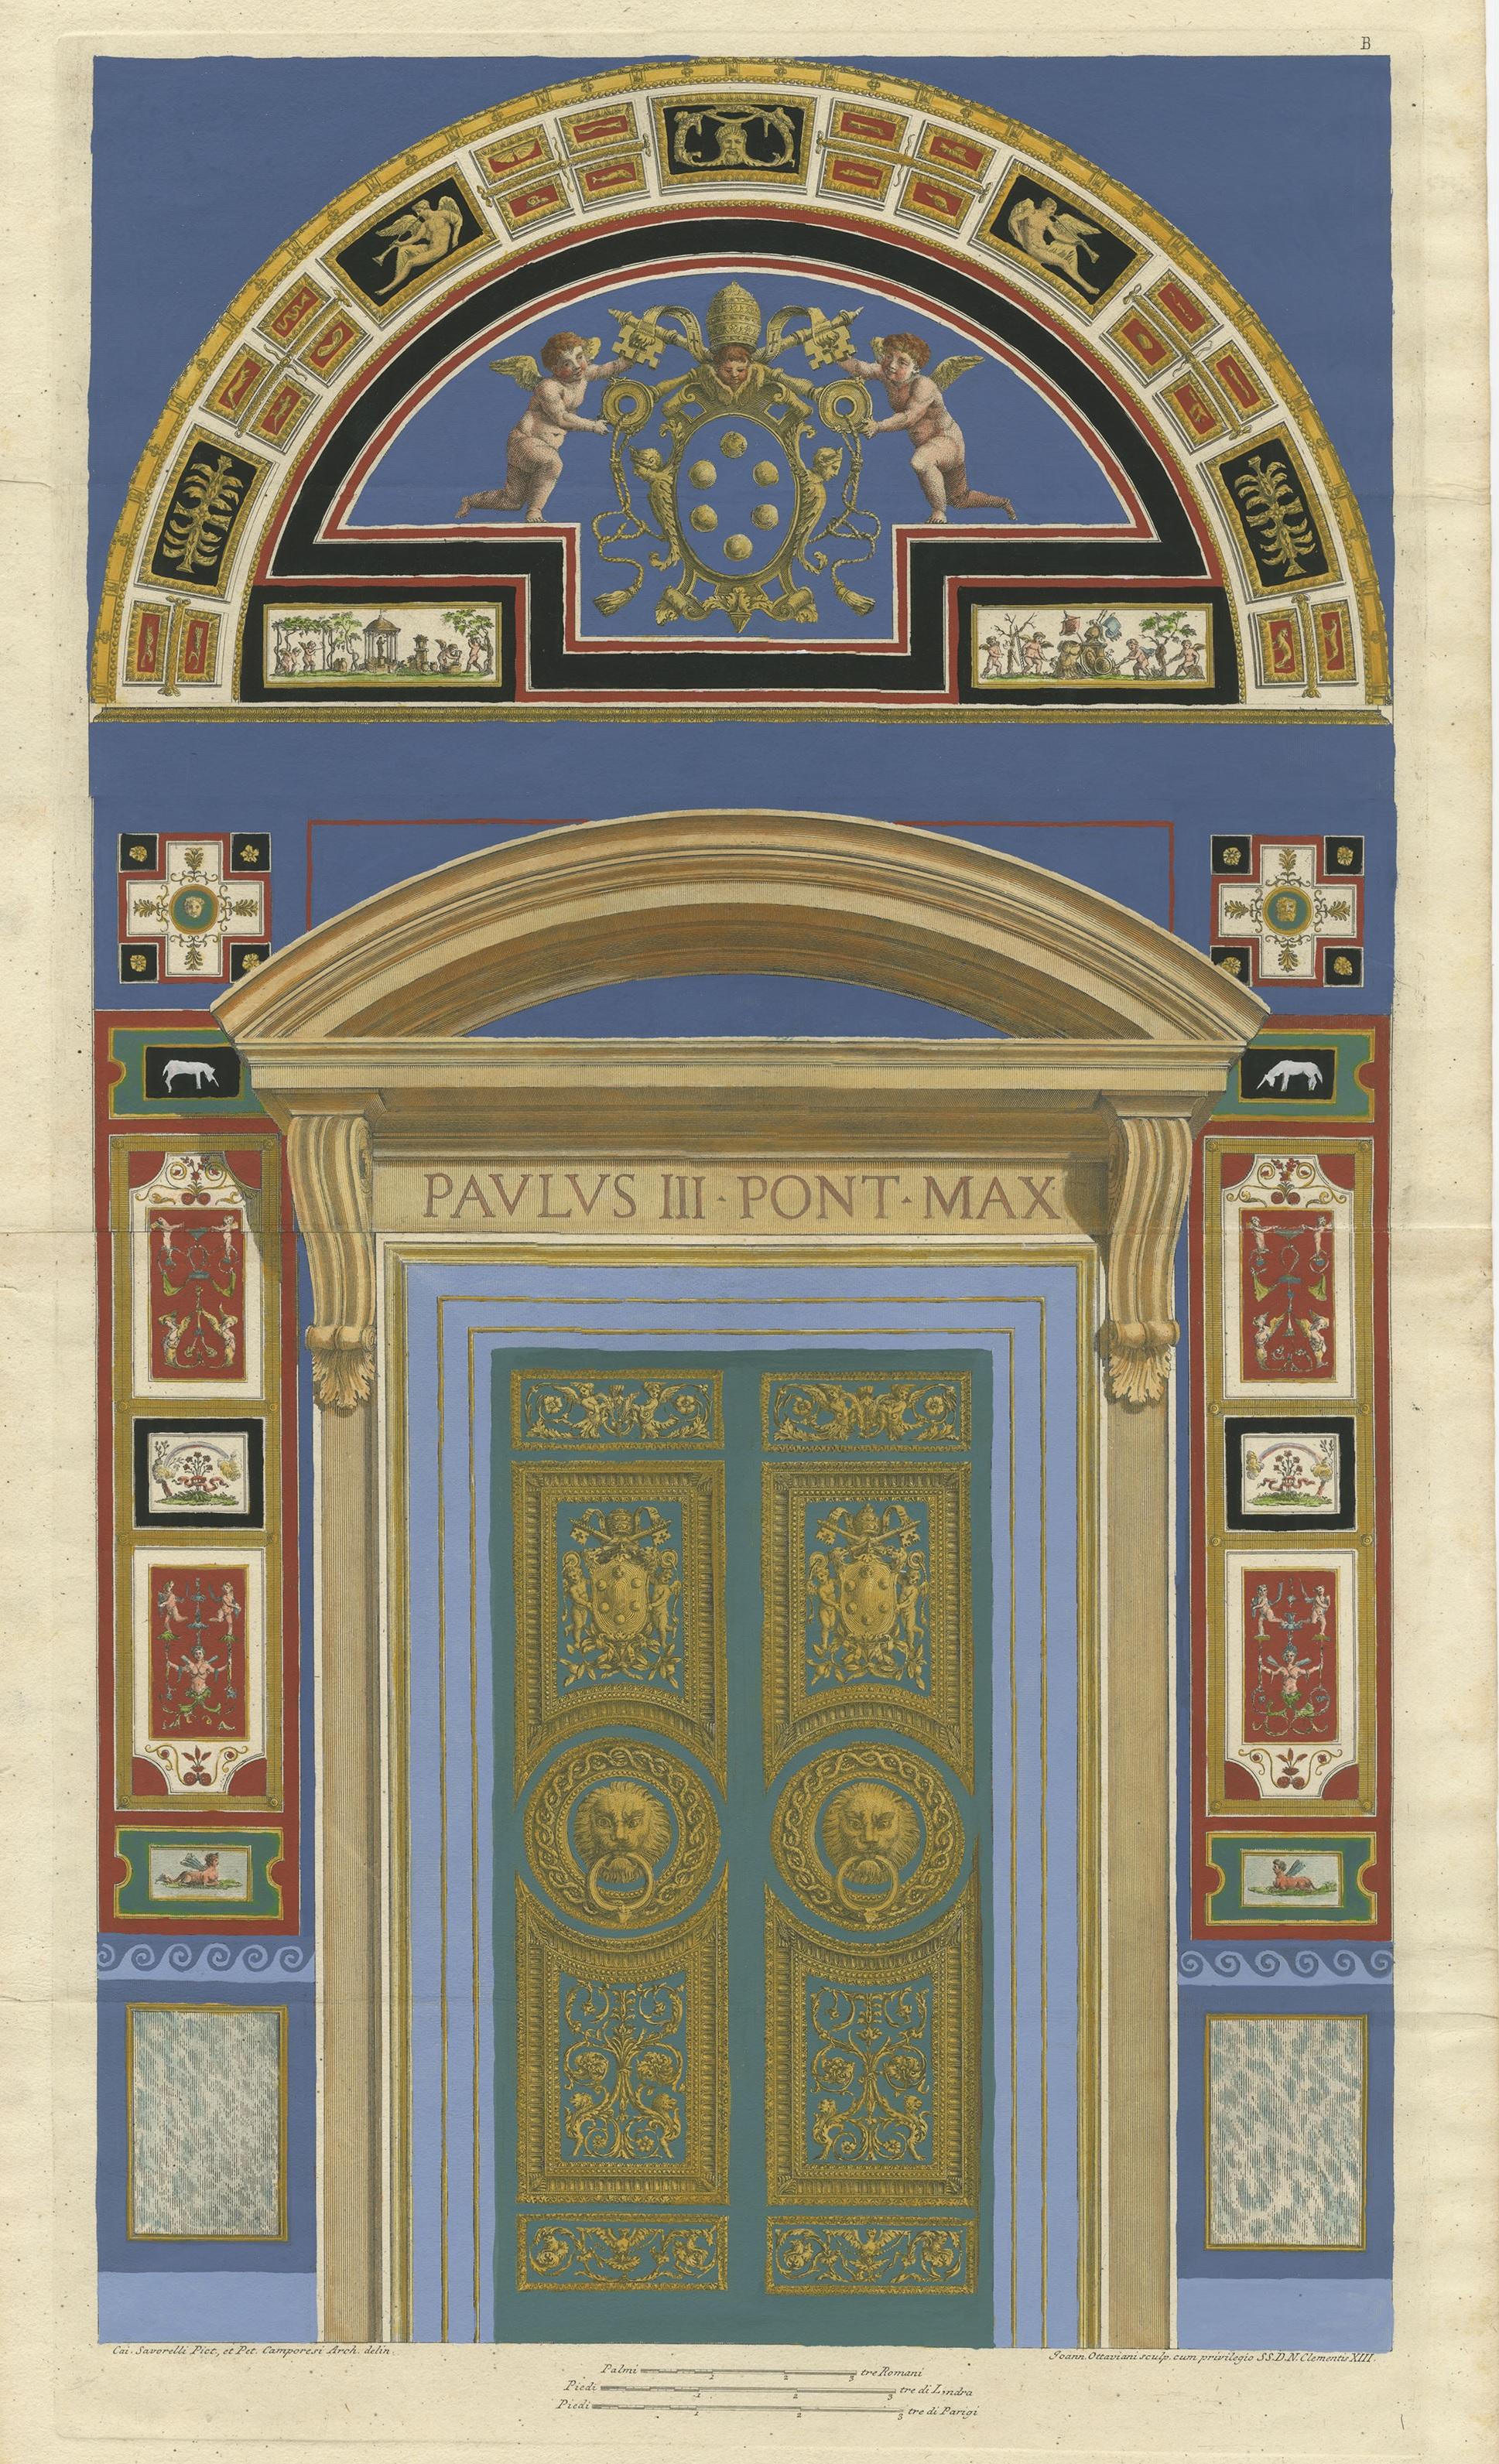 Antique print of a religious fresco or decorative pilaster. This print originates from 'Logge di Rafaele nel Vaticano'. Plates from this work are after the elaborate paintings found in the Vatican by Raphael (Rafaello) Sanzio d’Urbino. Engraved by